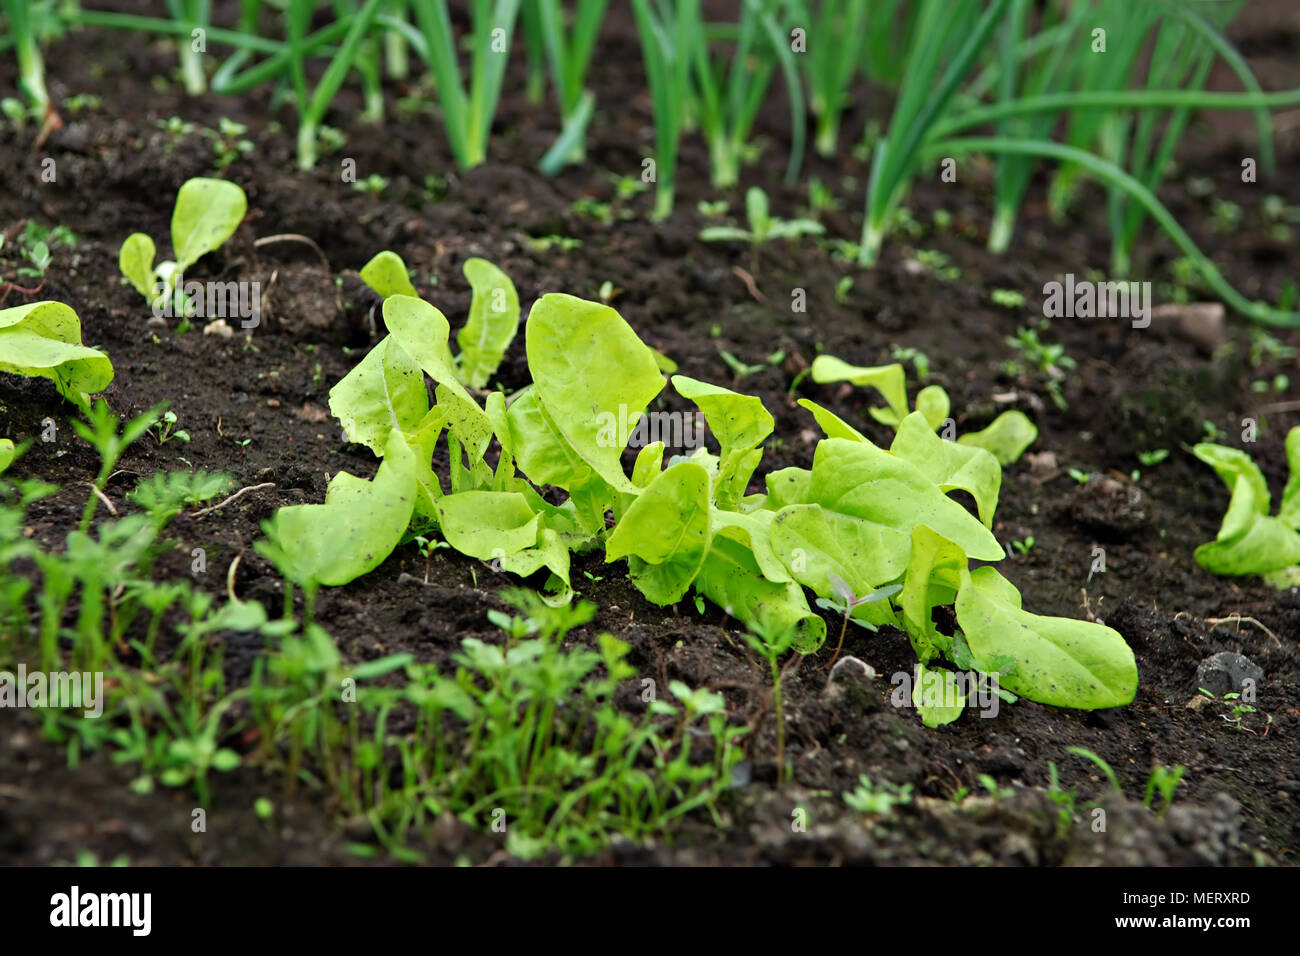 Different Bio vegetable seedlings (lettuce, onion) growing in the soil. Stock Photo